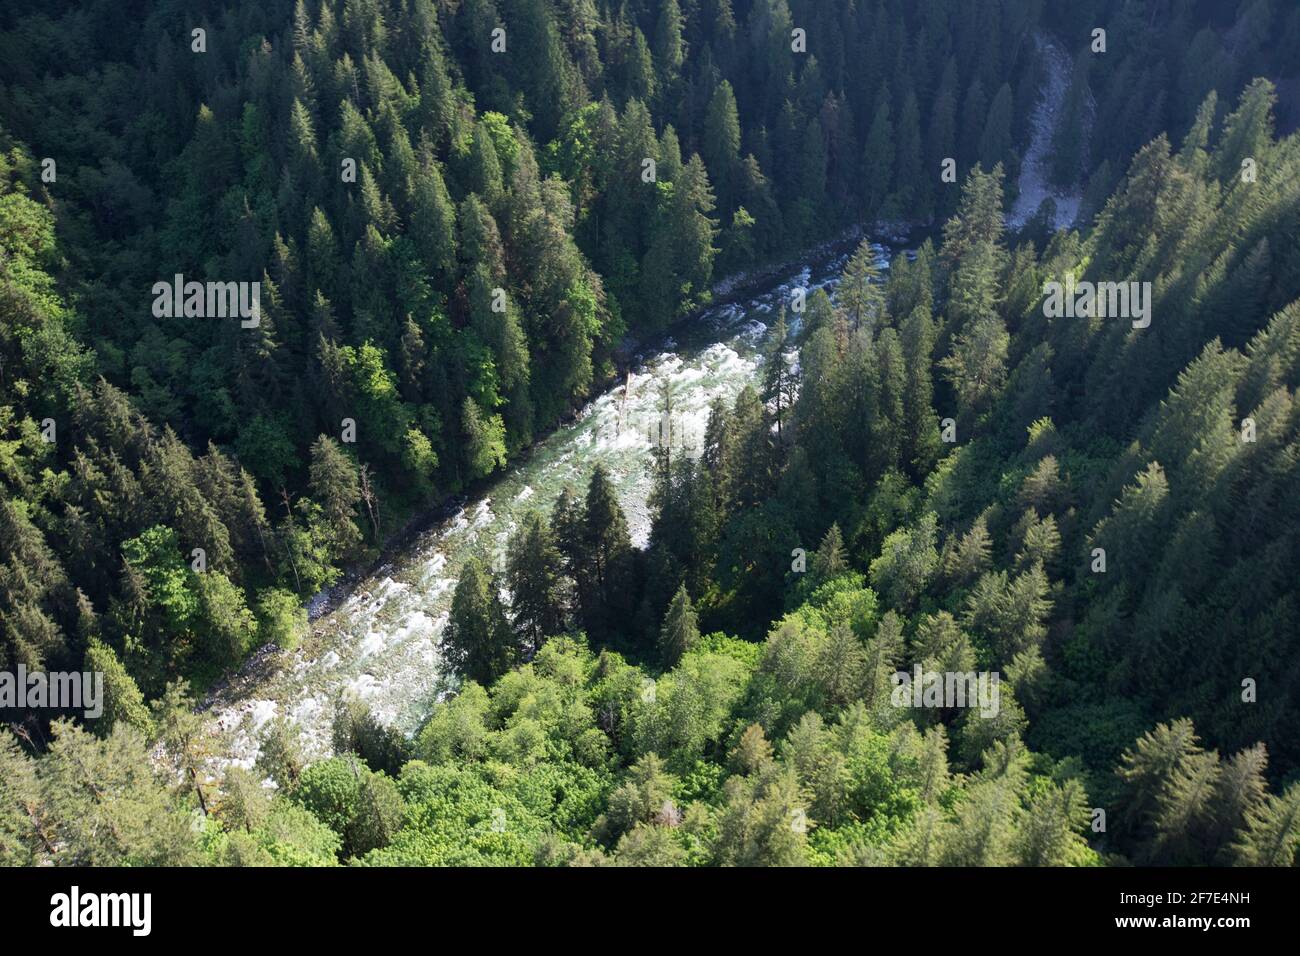 Aerial view of Harrison River meandering through lush temperate forest Stock Photo